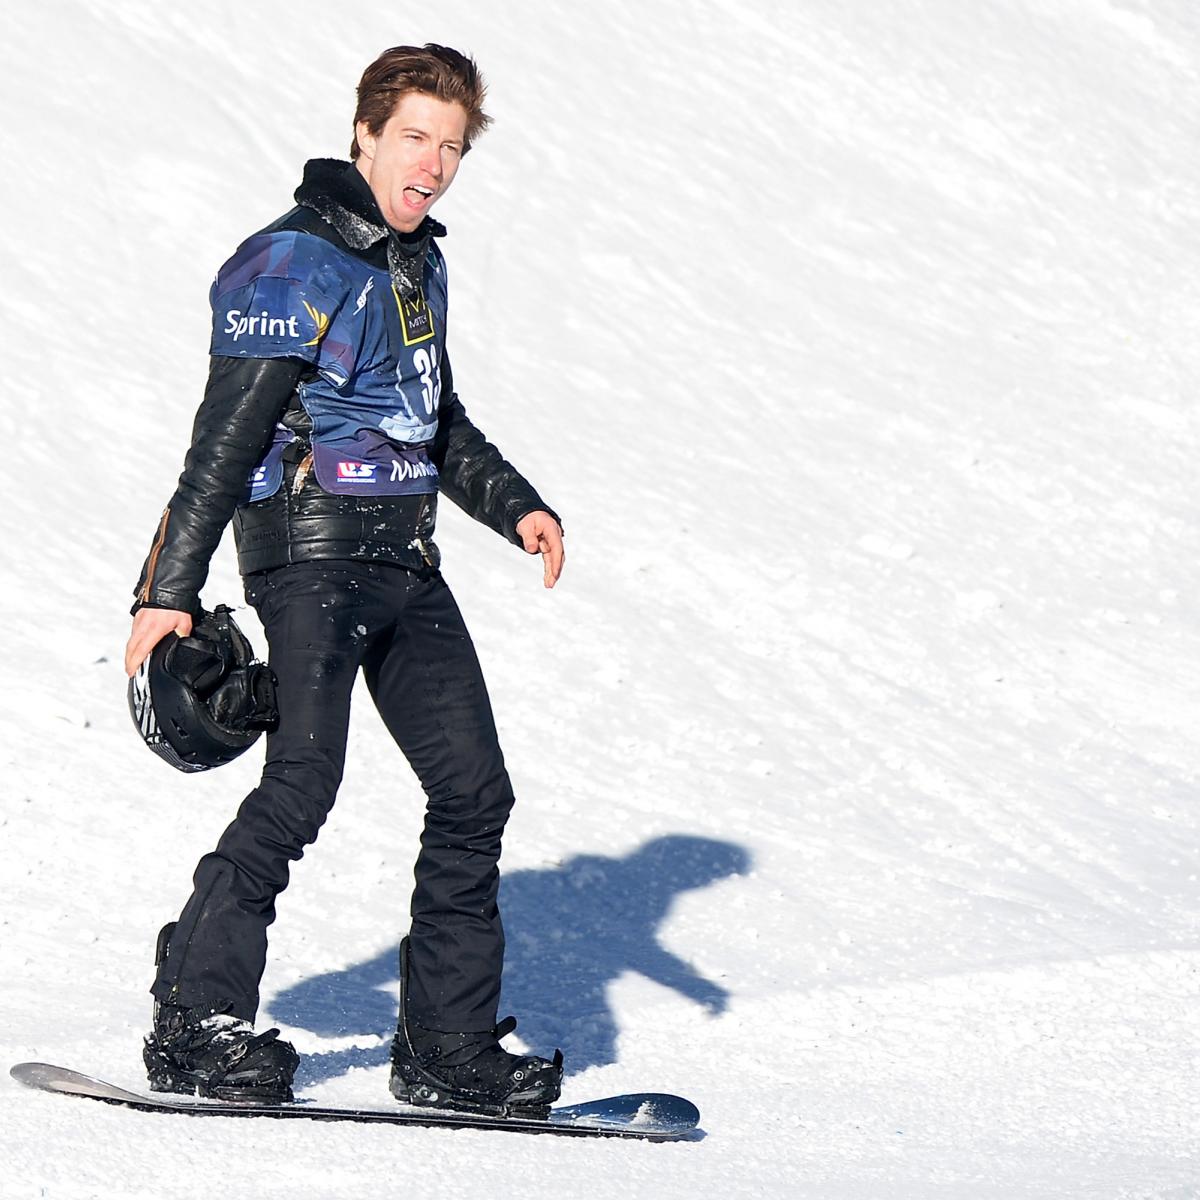 Shaun White opted out of the X Games, so this Connecticut